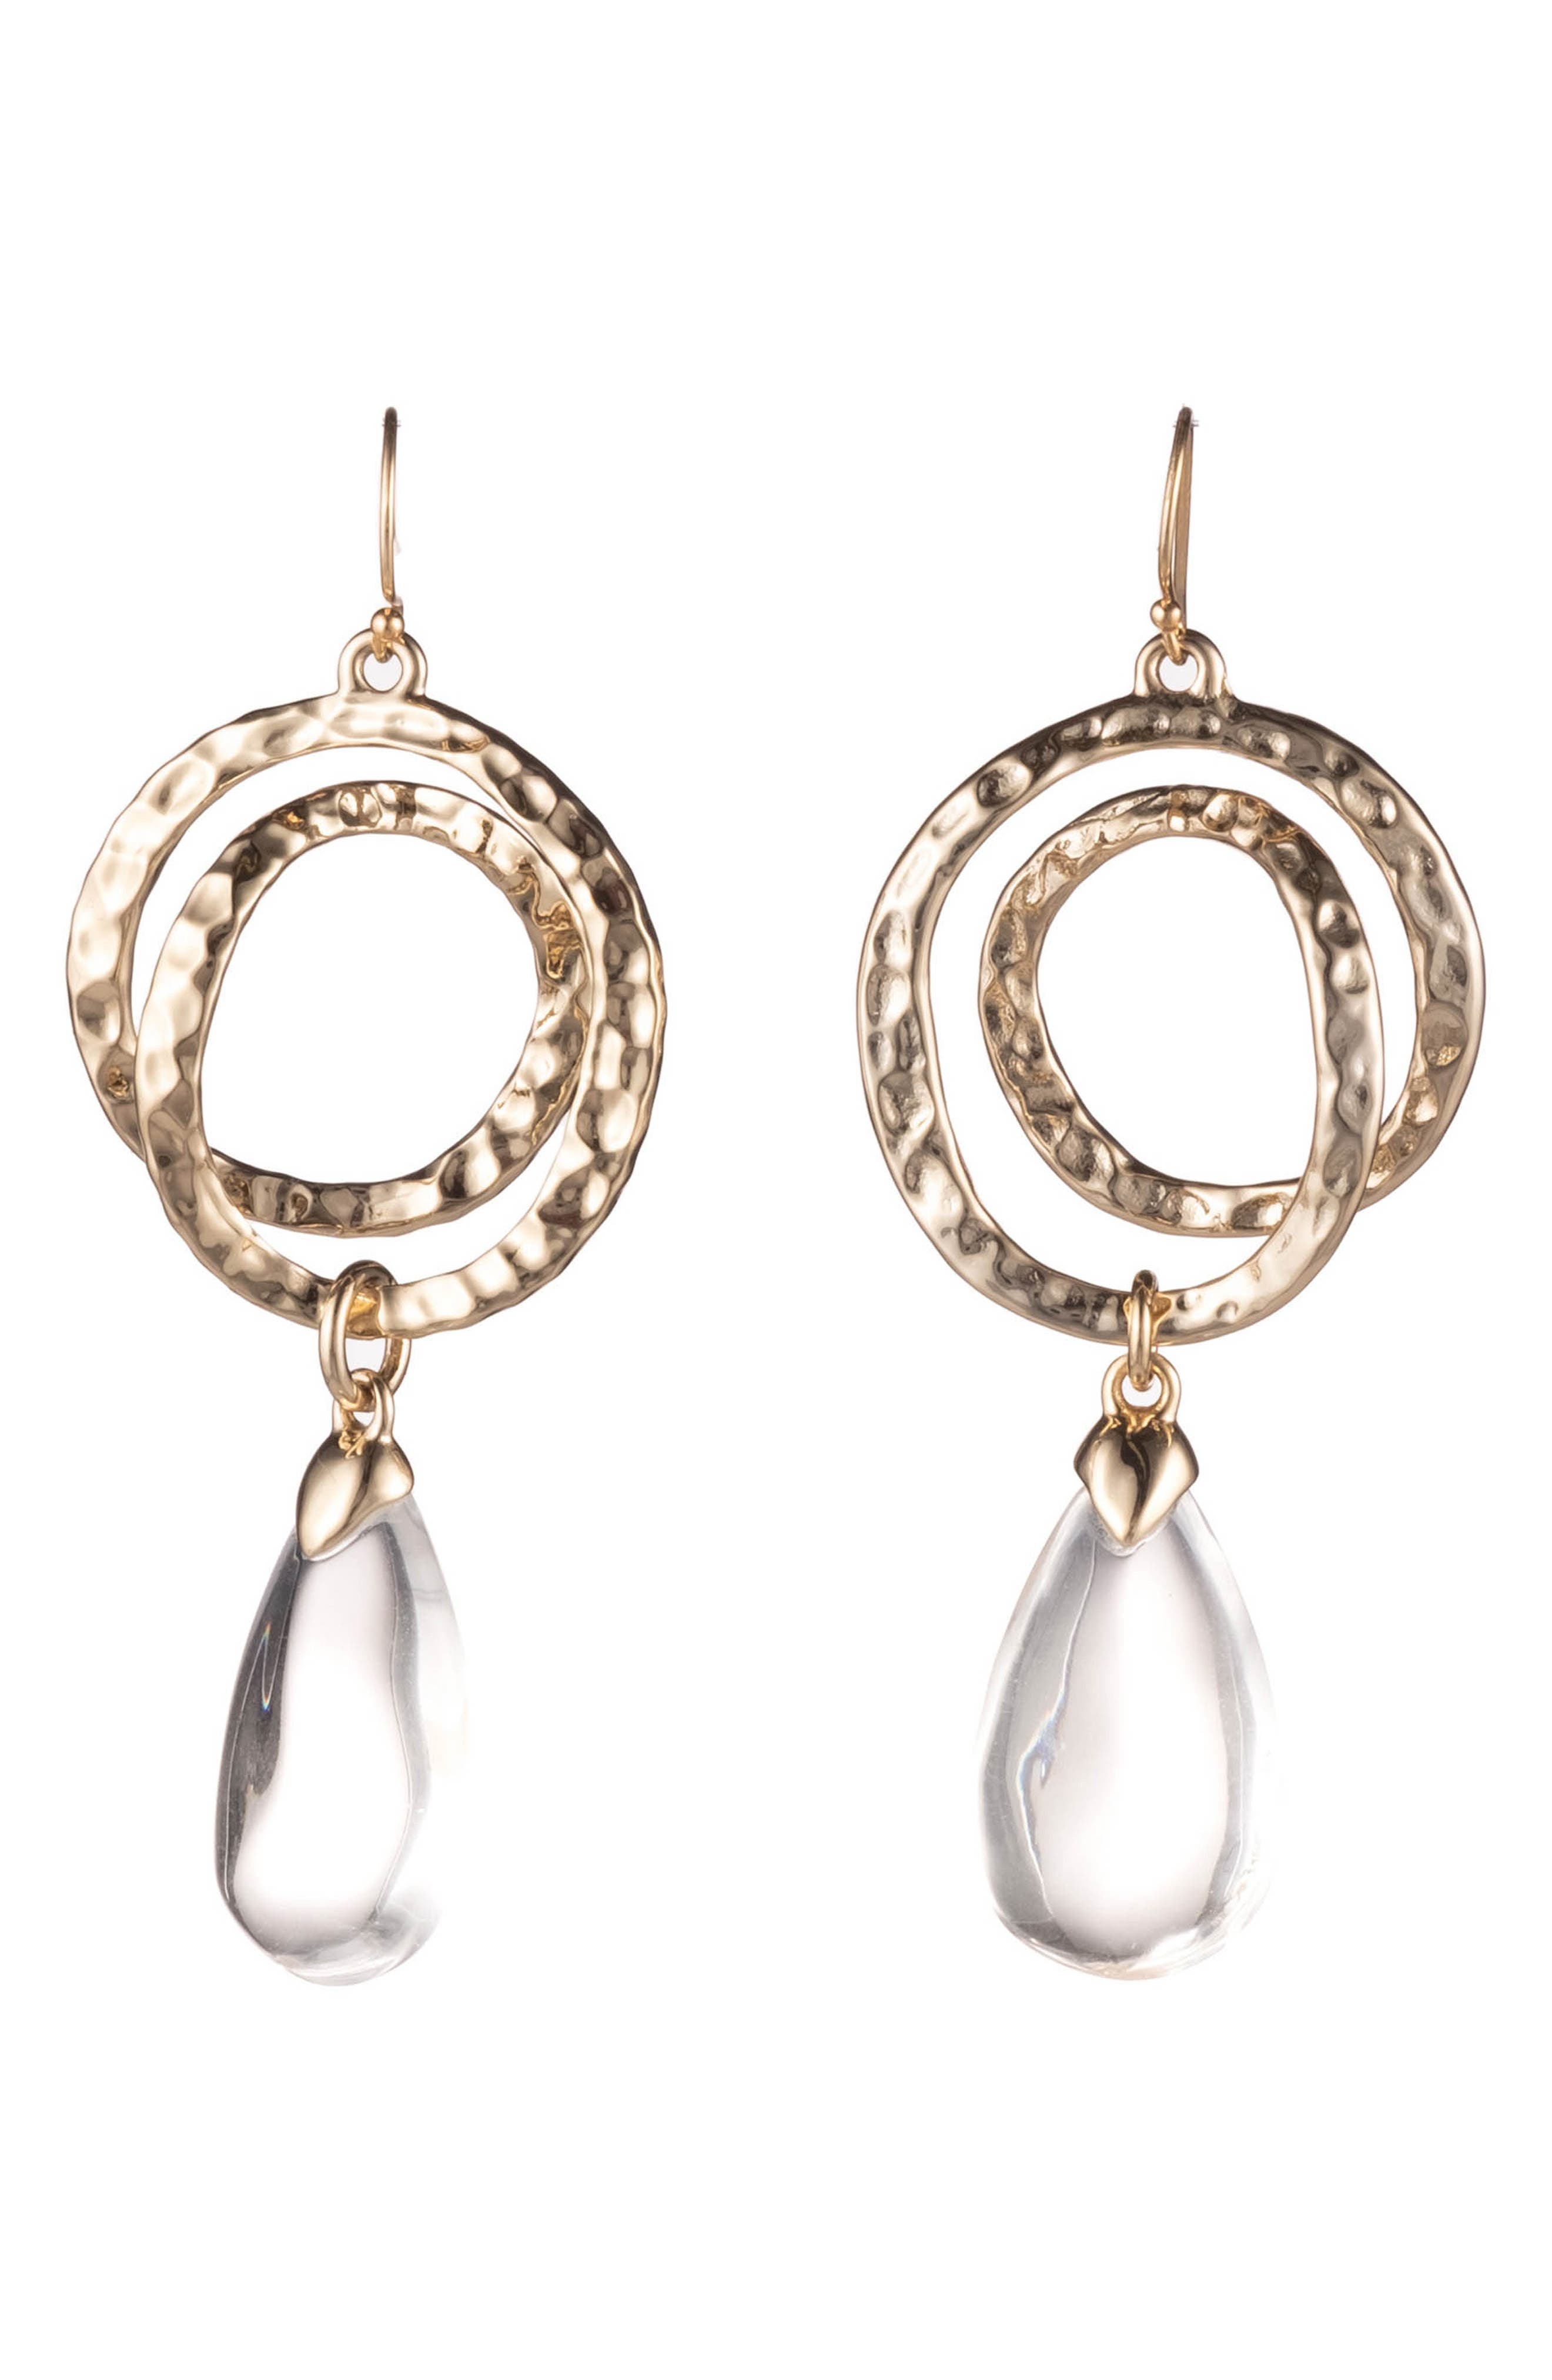 Alexis Bittar 10k Gold Plated Hammered Coil & Lucite Drop Earrings